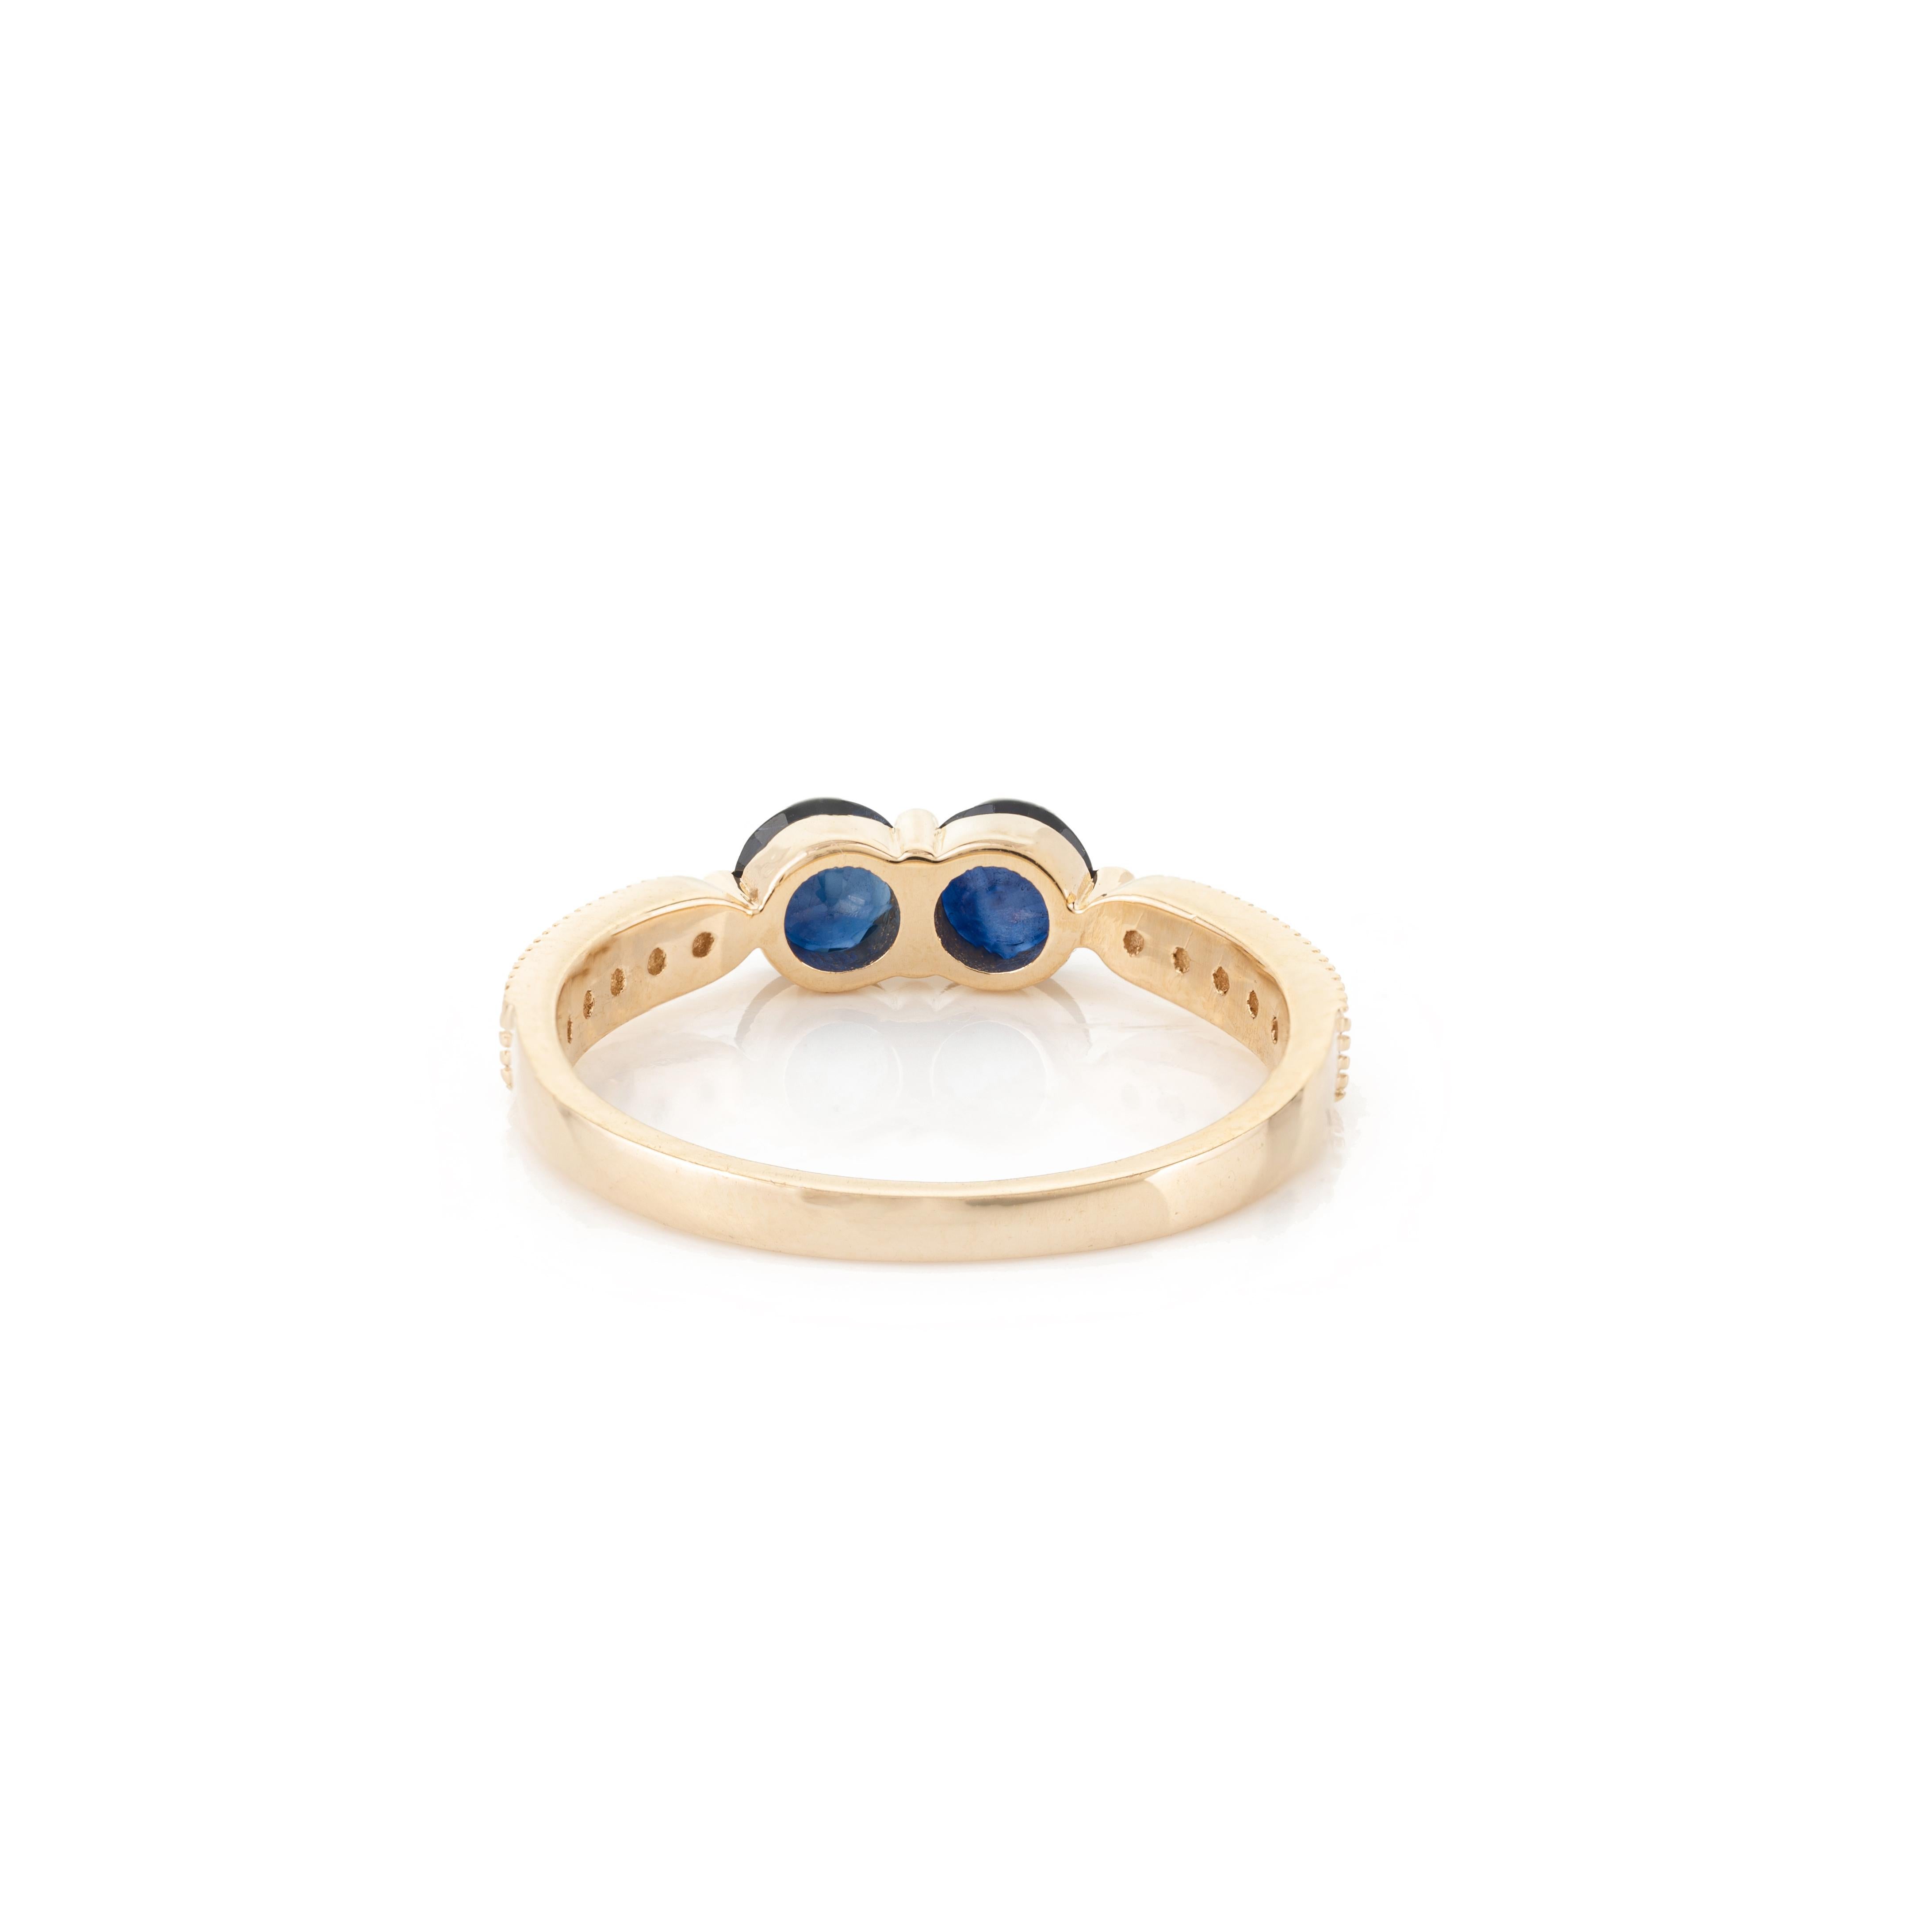 For Sale:  18k Solid Yellow Gold Two Stone Blue Sapphire Diamond Ring Wedding Gift for Her 7